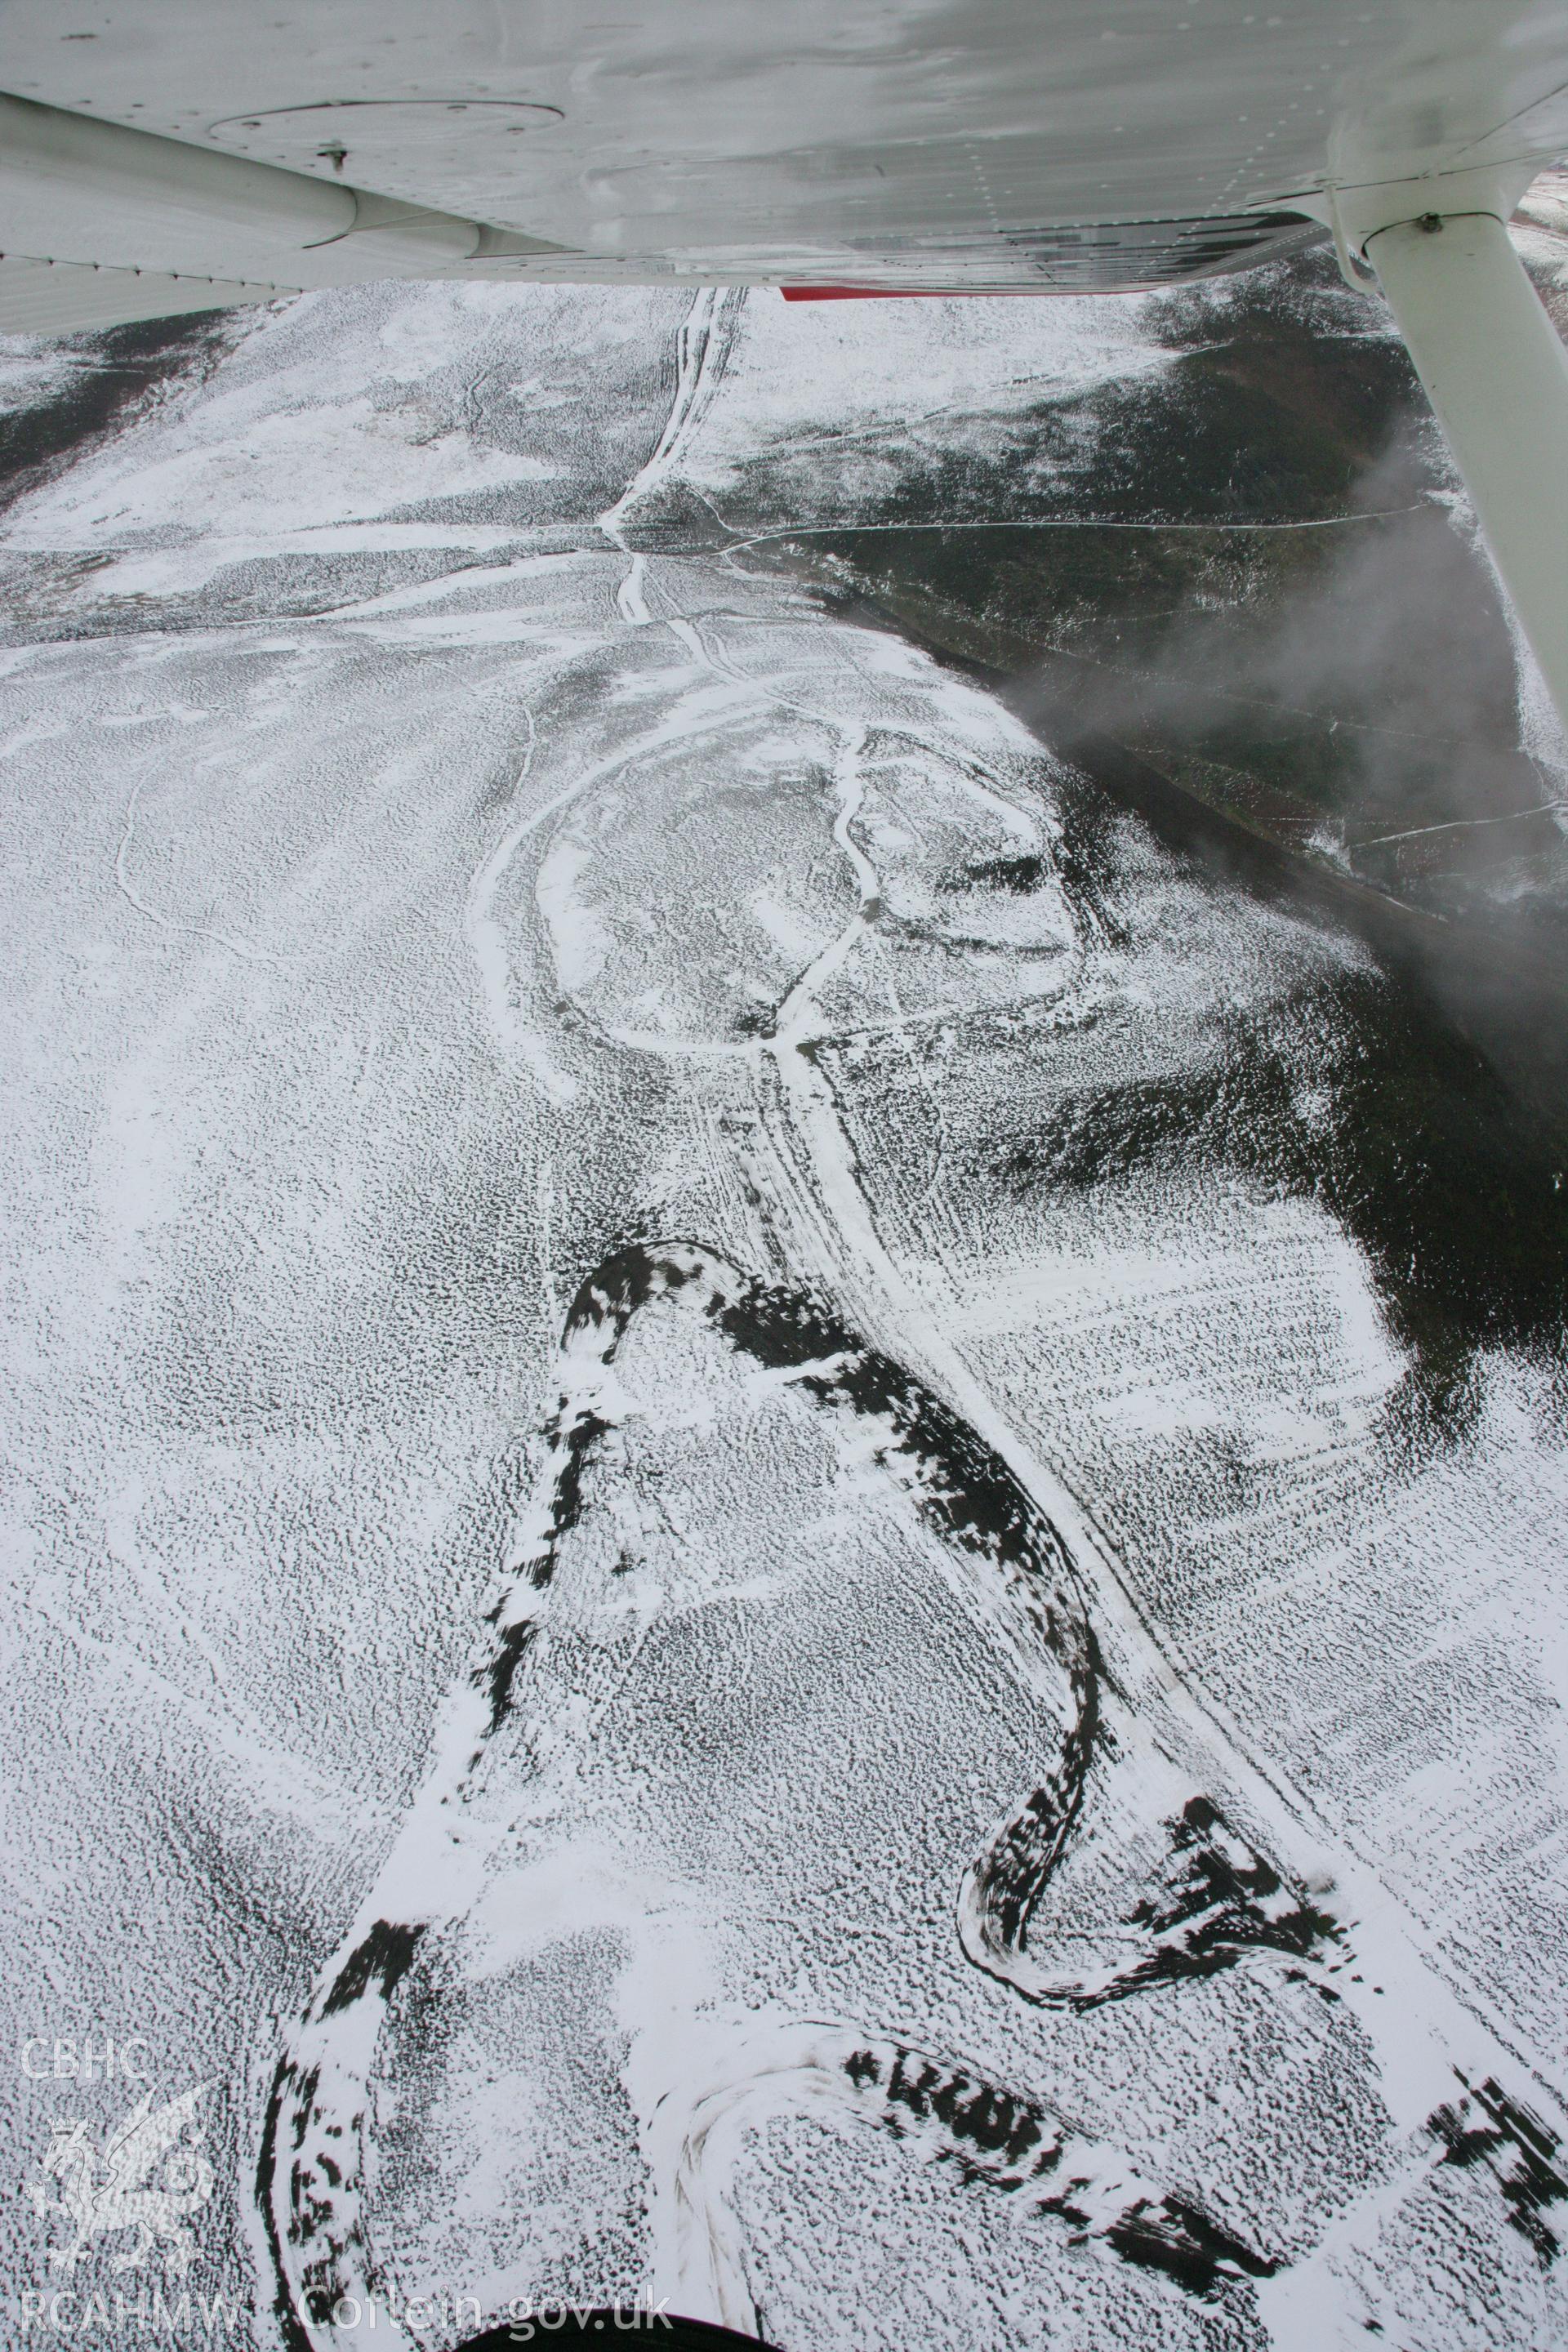 RCAHMW colour oblique aerial photograph of Moel-y-Gaer Hillfort with motorcycle track, Llantysilio, in winter landscape viewed from the south-west. Taken on 06 March 2006 by Toby Driver.